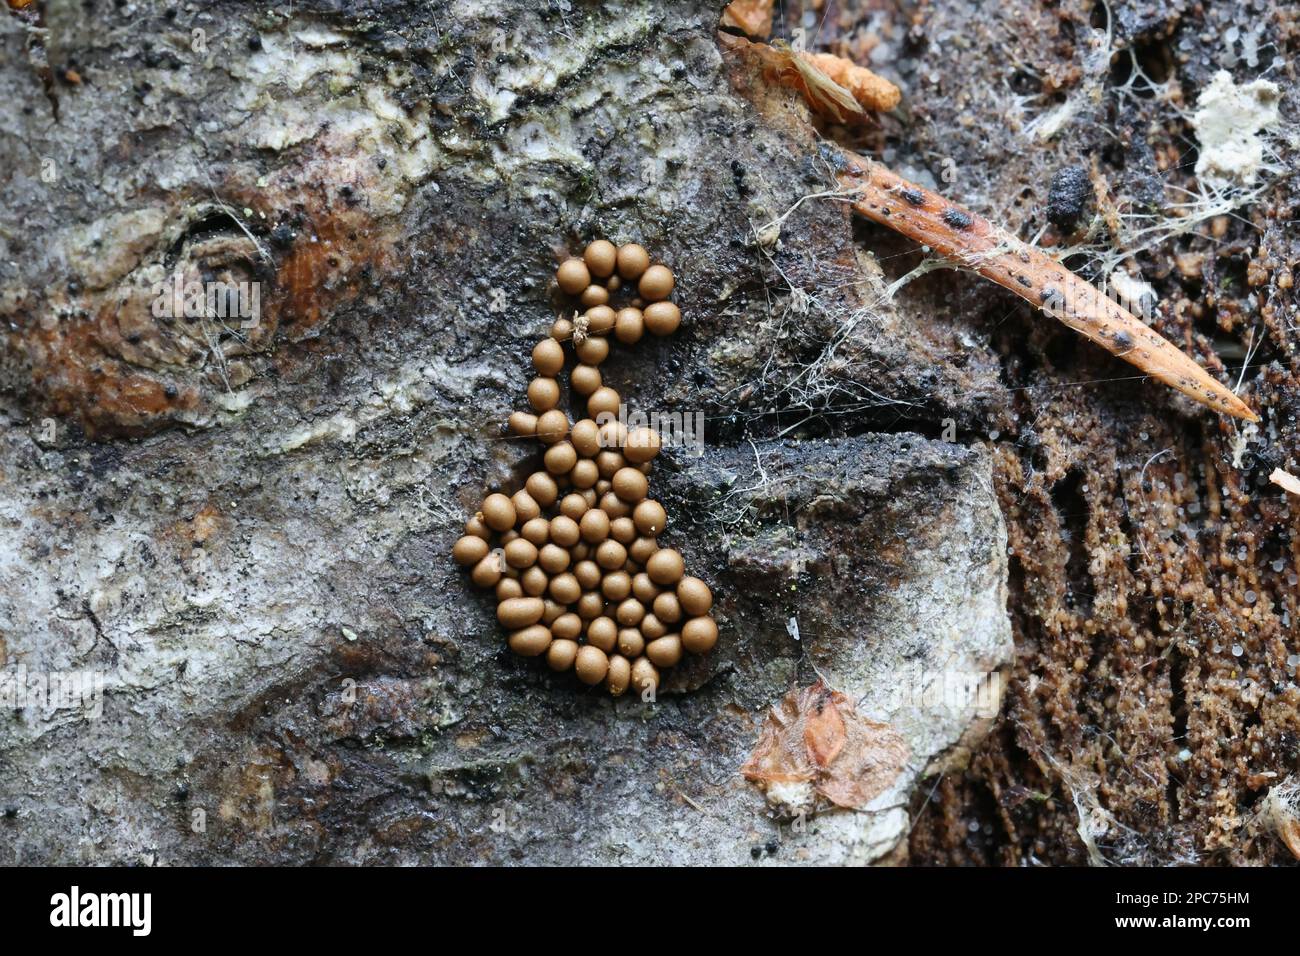 Trichia varia, a slime mold from Finland with no common English name Stock Photo